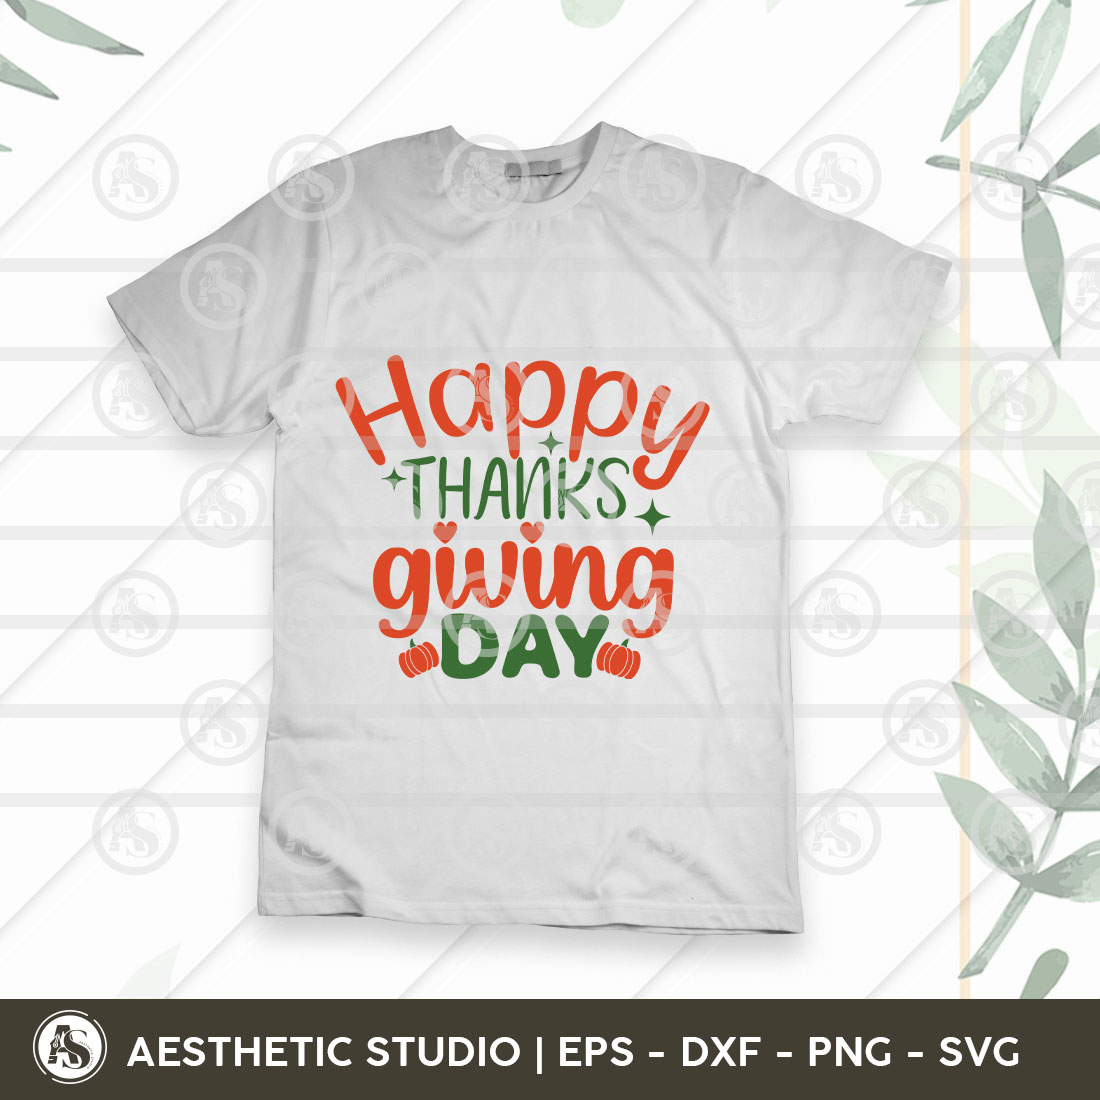 Happy Thanksgiving Day Svg, Thanksgiving Svg, Fall Svg, Pumpkin, Thanksgiving Shirt Png Cut Files, Turkey svg, Gobble Svg, Pumpkin Spice, Fall Leaves Svg, Autumn Svg, Grateful svg, Thanksgiving Quote, Cut Files for Cricut, preview image.